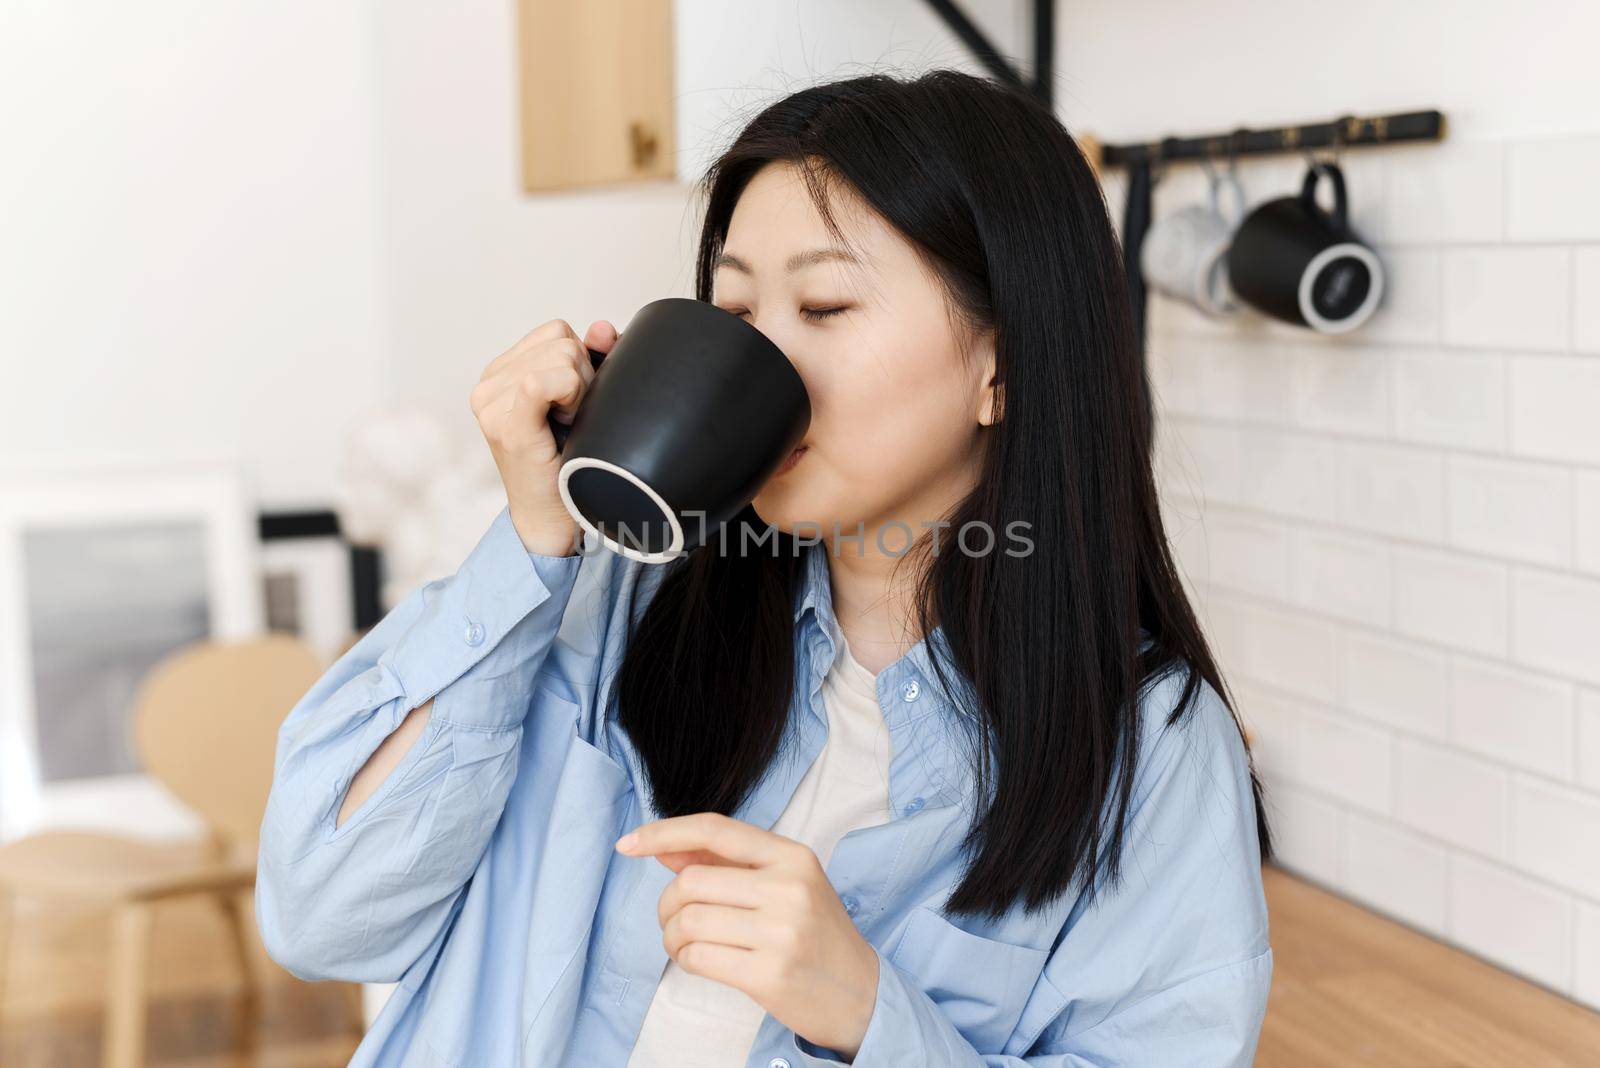 A charming Korean woman in the kitchen, holding a cup of coffee or tea